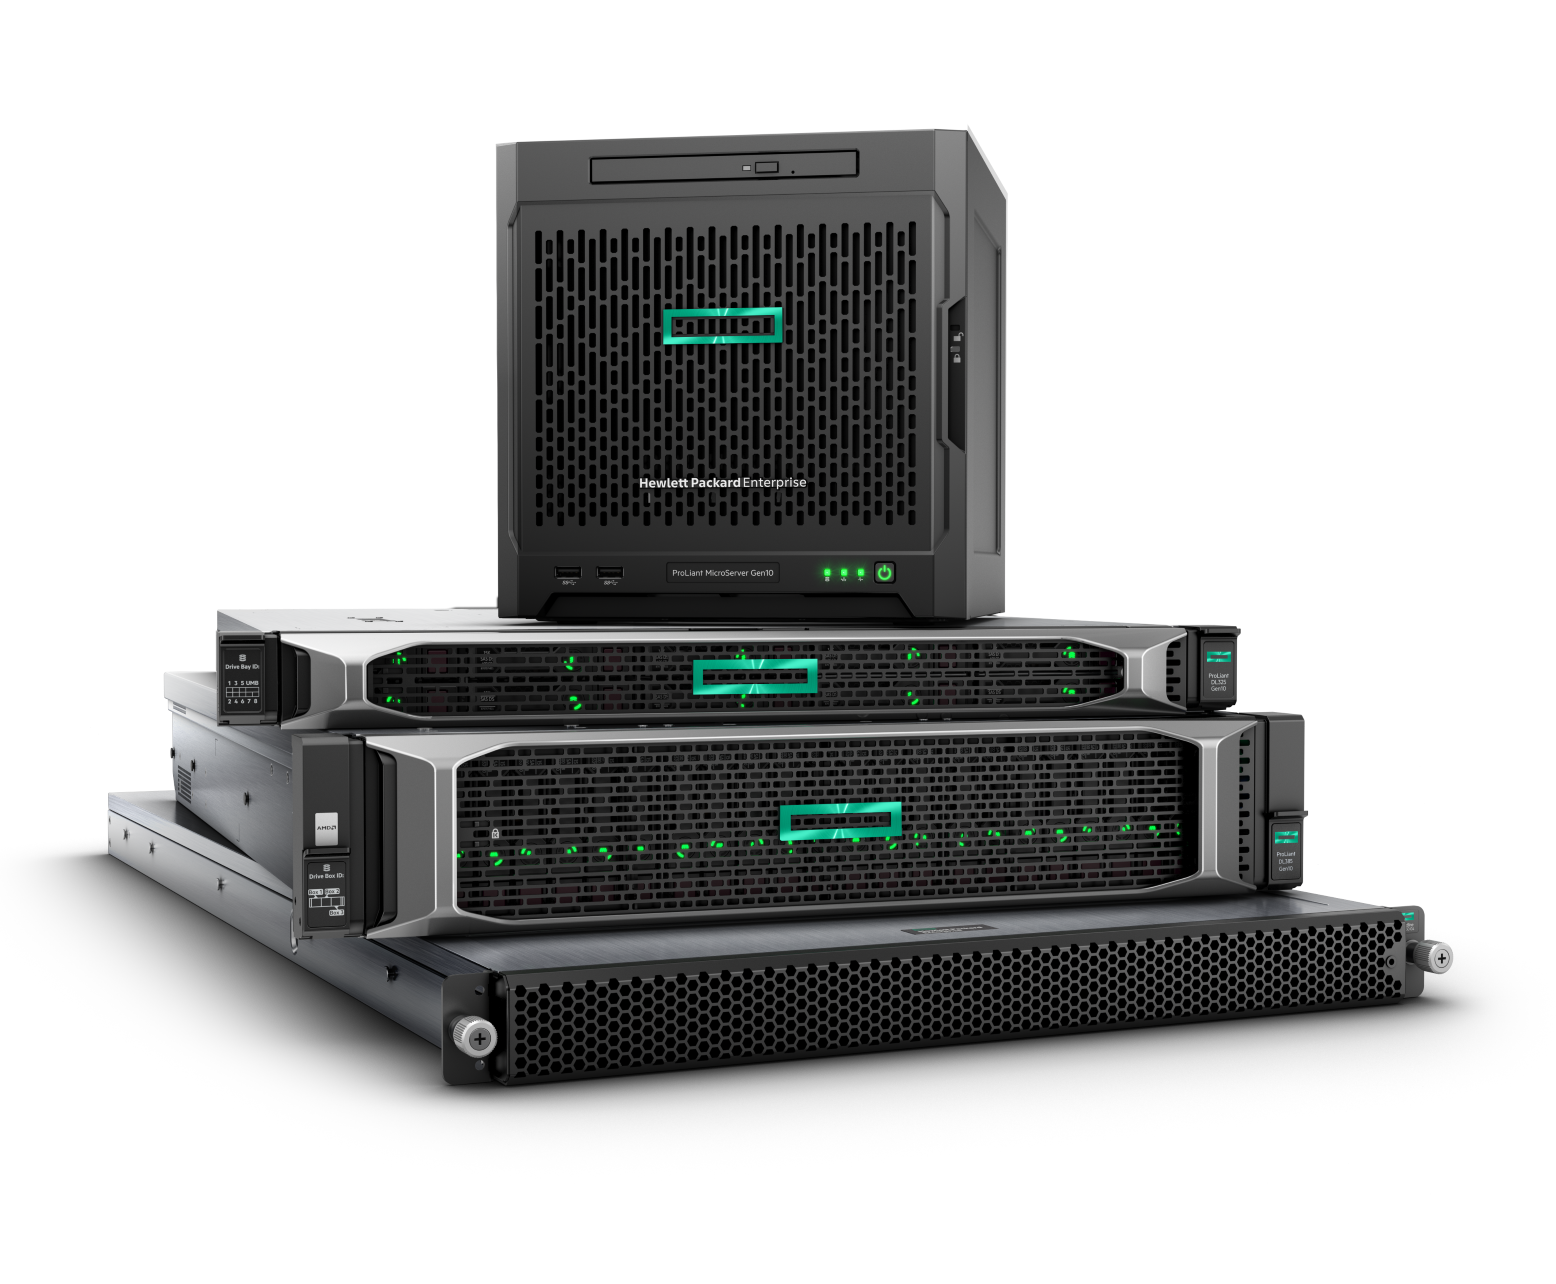 HPE: Our AMD-Powered Servers Have Broken 37 Performance Records